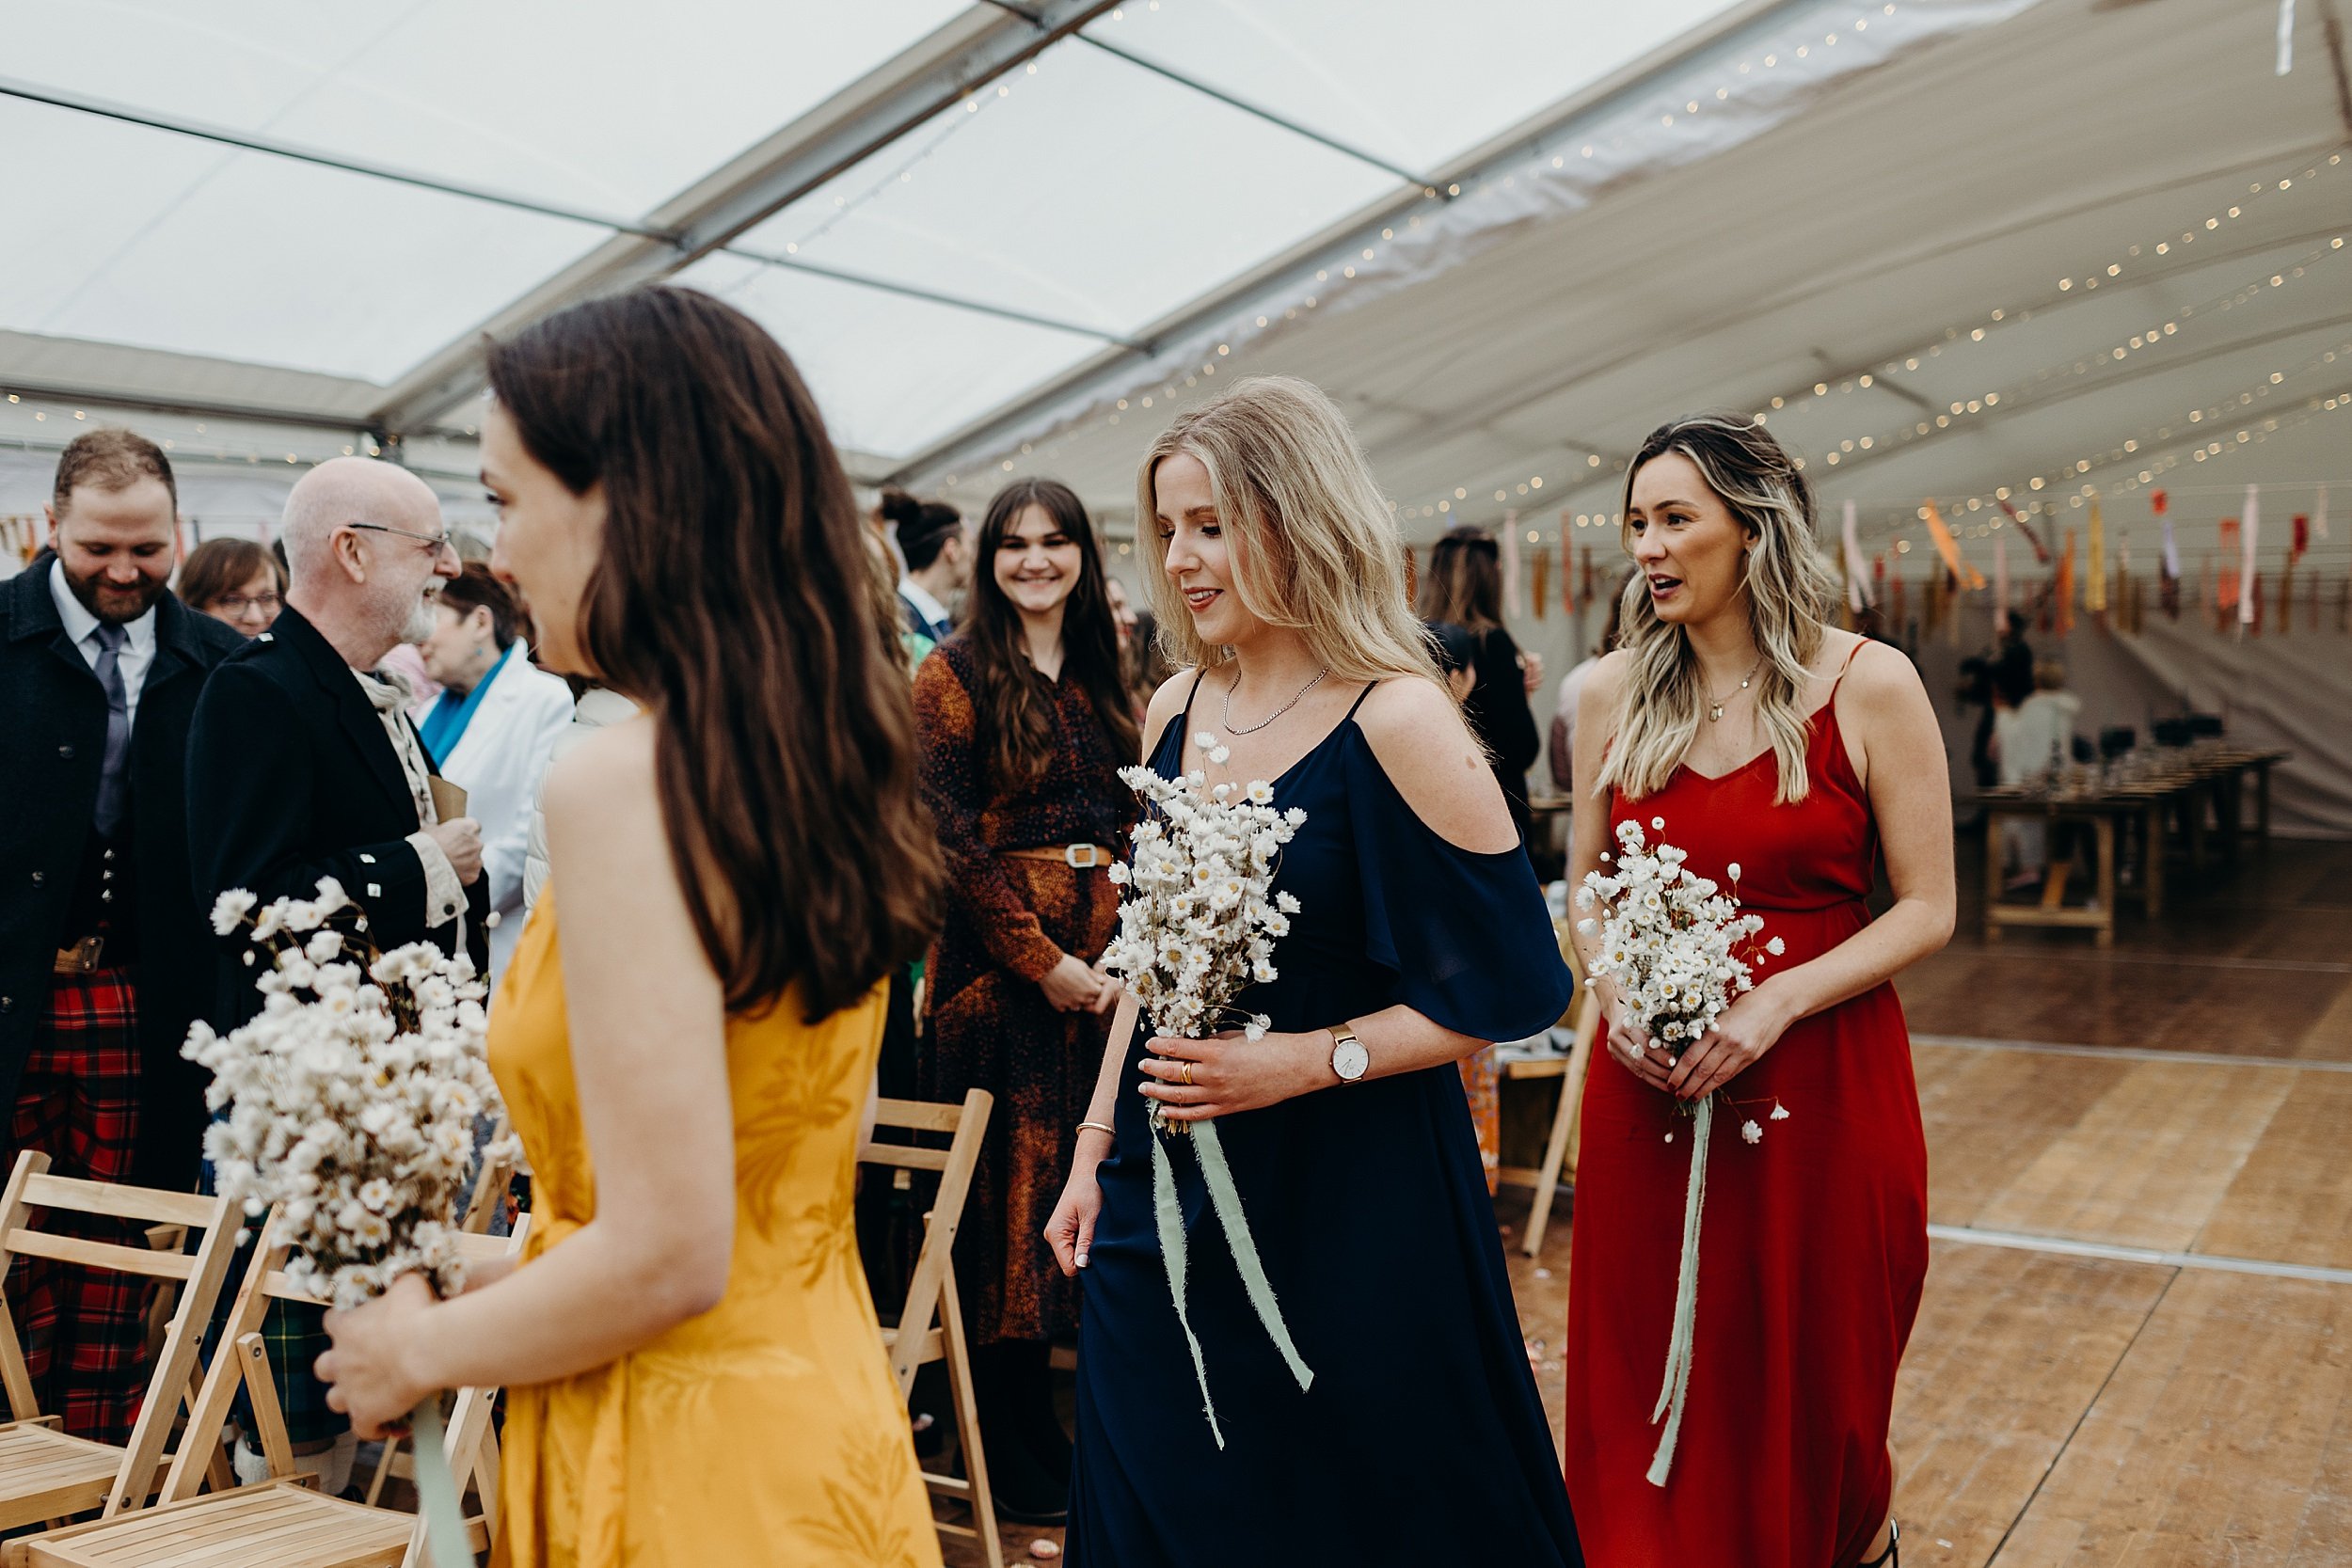 guests look on as three bridesmaids wearing colourful dresses and carrying white bouquets walk down the aisle before a harvest moon wedding ceremony